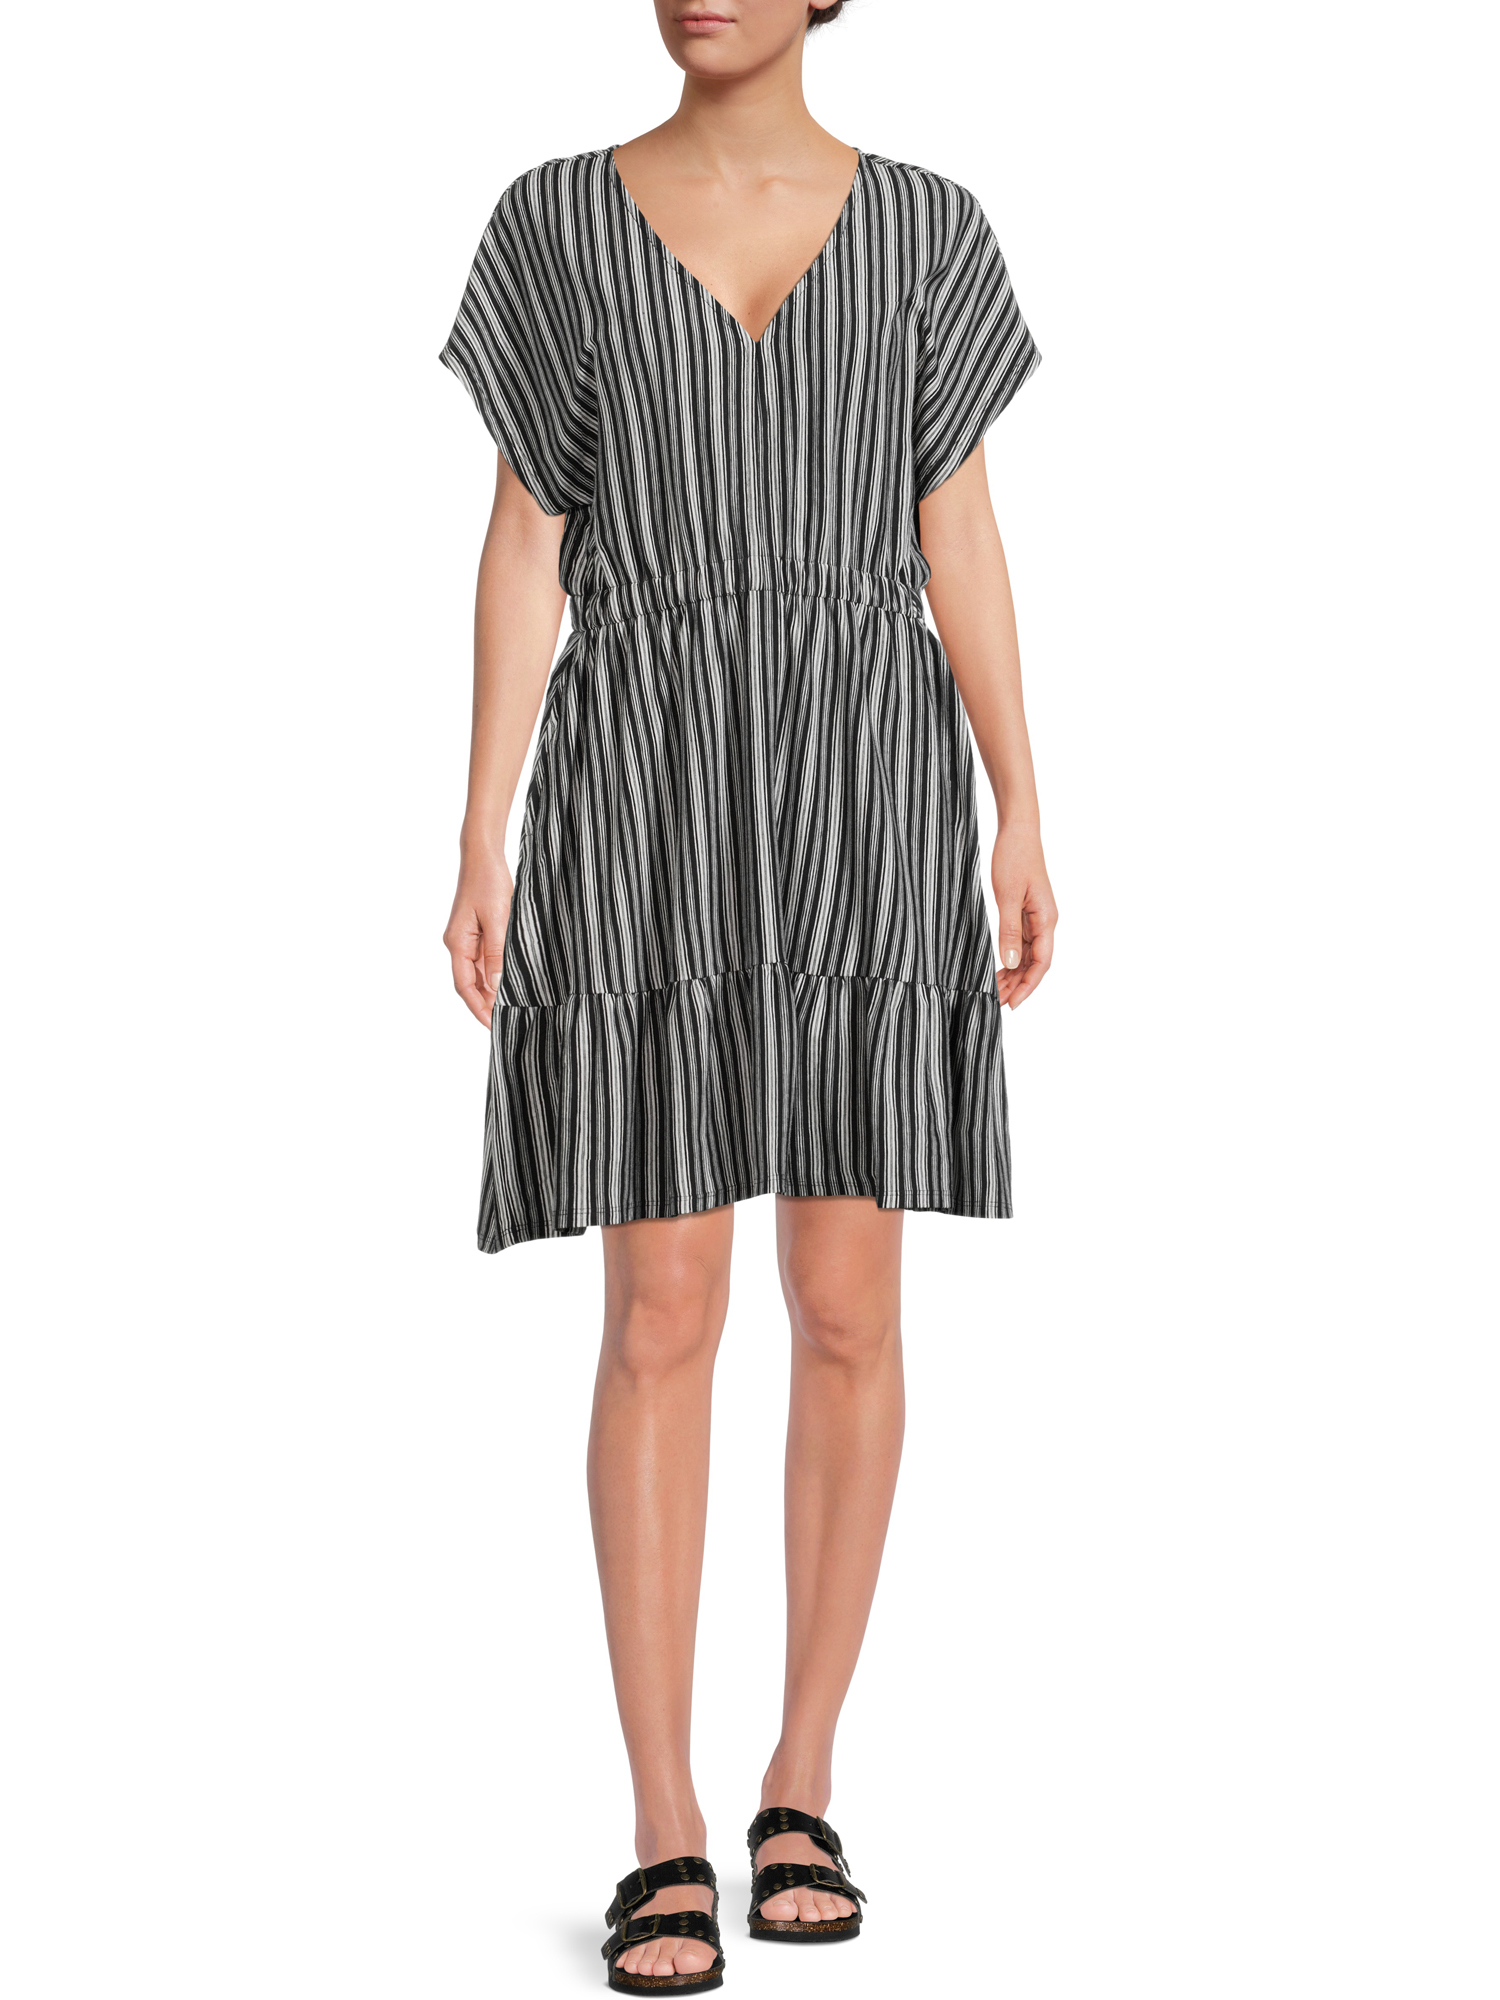 Time and Tru Women's V-Neck Printed Knit Dress - image 4 of 5